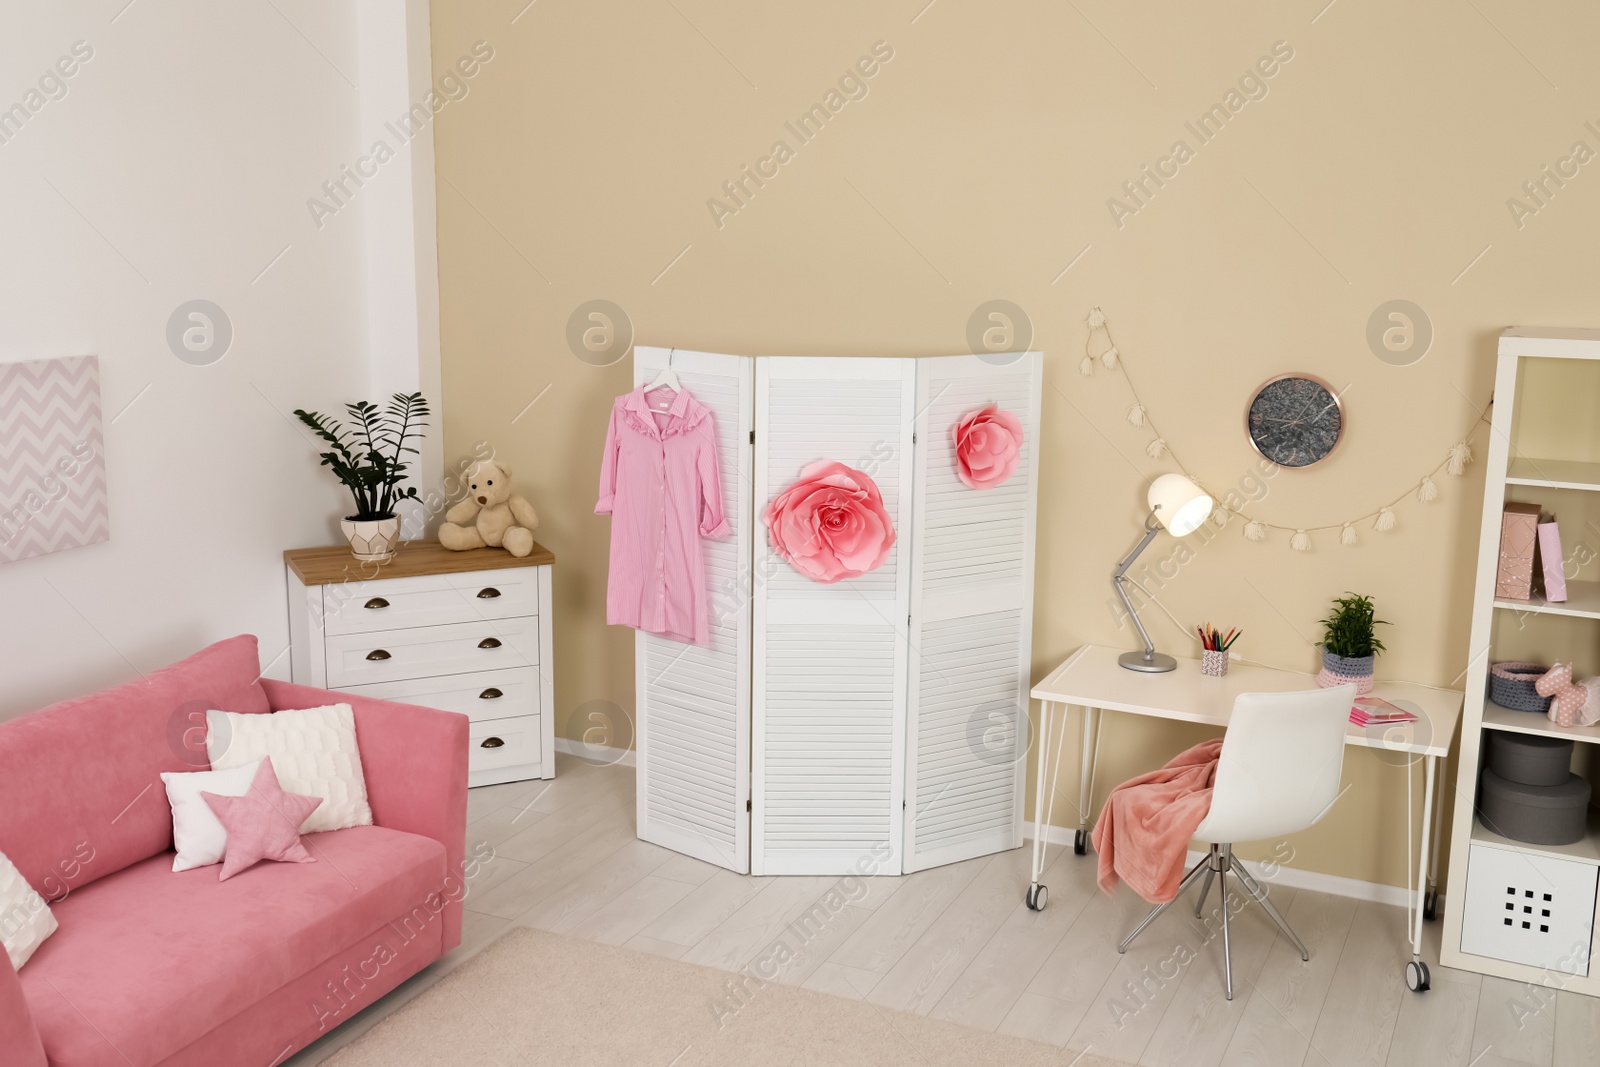 Photo of Cozy child room interior with sofa, study station and modern decor elements